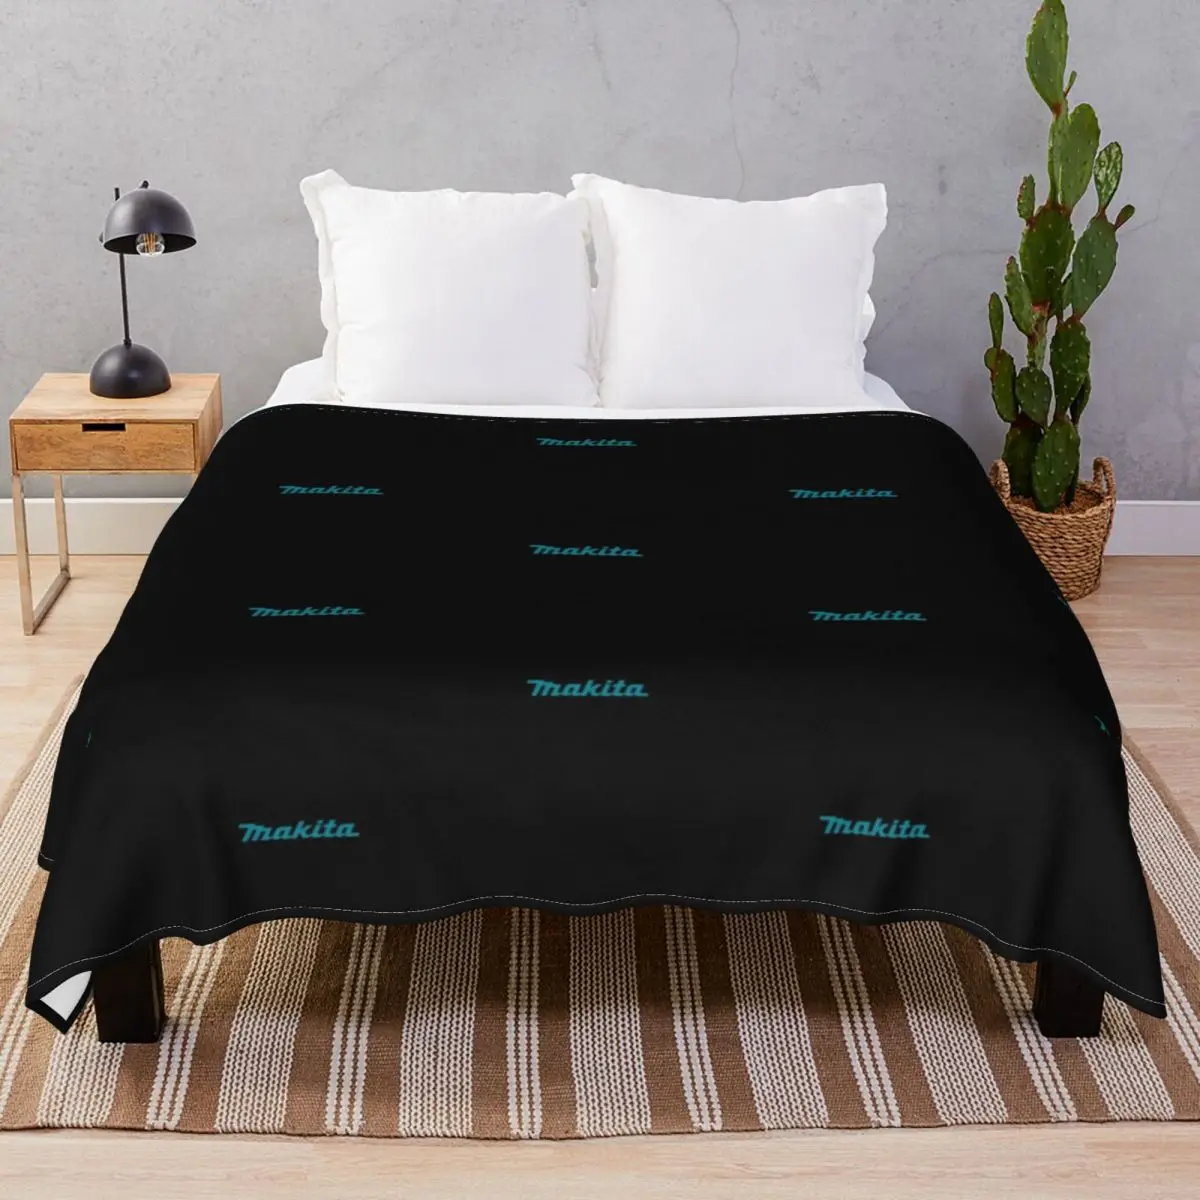 Makita Power Tools Logo Blanket Fleece Plush Decoration Super Warm Unisex Throw Blankets for Bedding Home Couch Camp Office